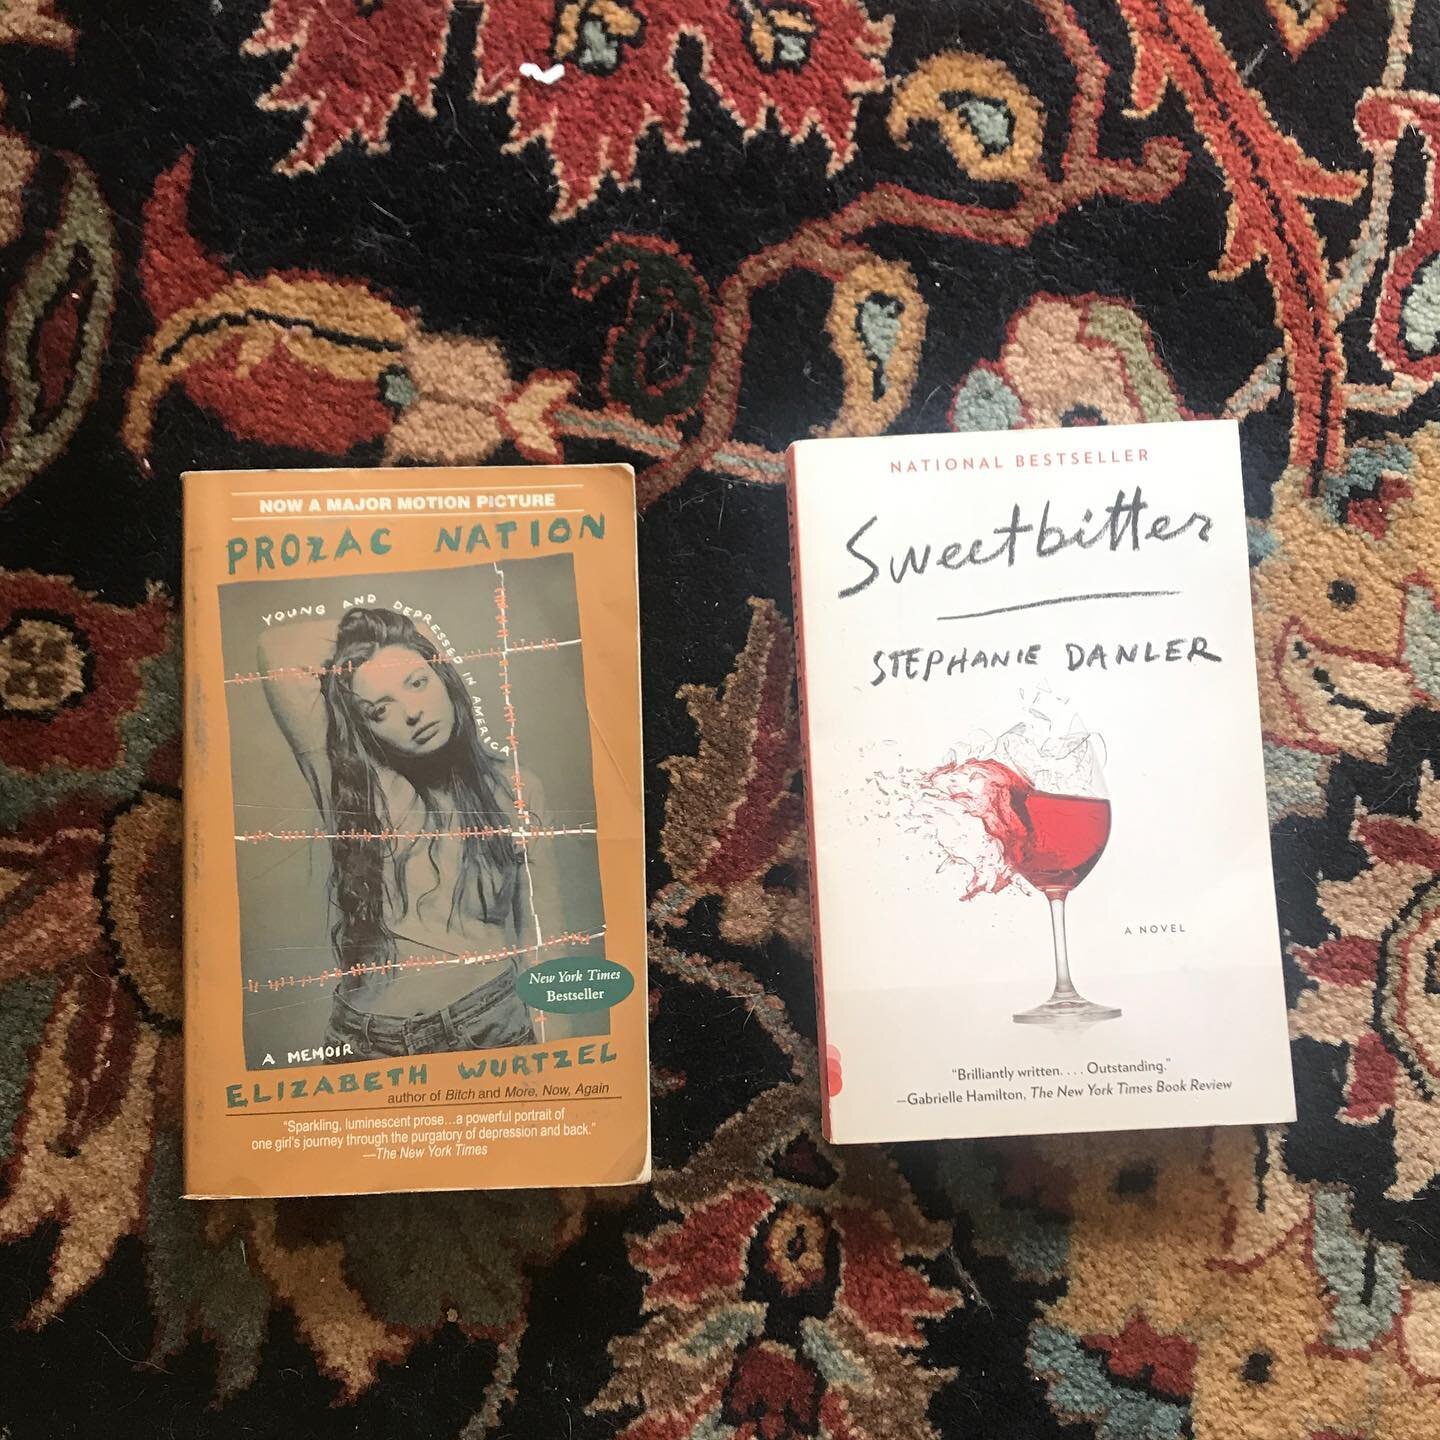 Elizabeth Wurtzel was told that her memoir, Prozac Nation, would sell better as a novel. @smdanler was told that her novel, Sweetbitter, would sell better as a memoir. By sticking to their creative visions they both wrote national bestsellers and boo